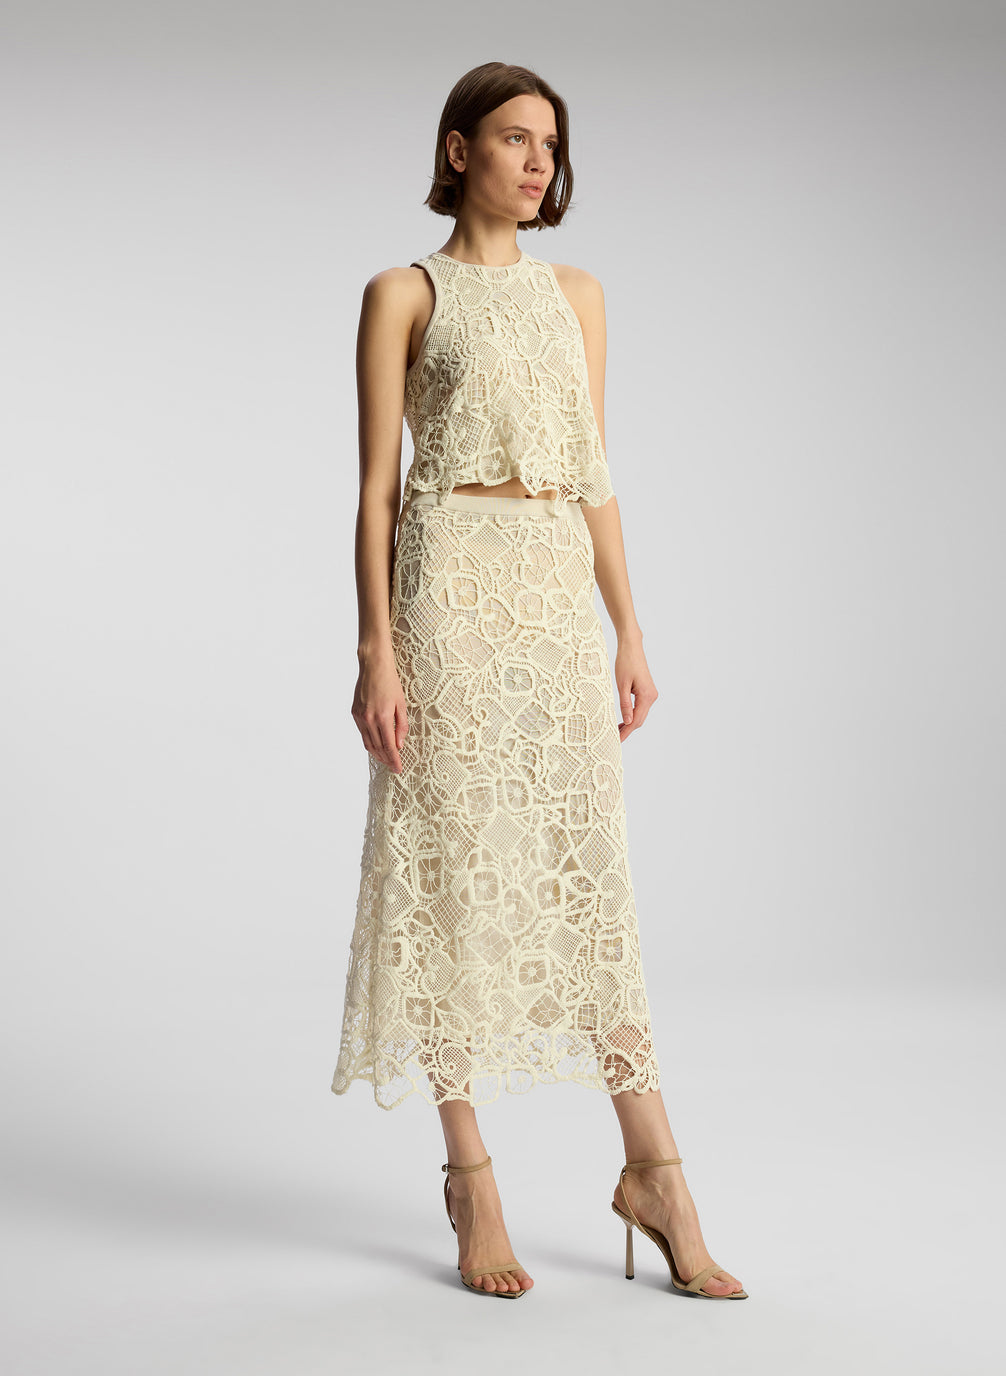 side view of woman wearing off white lace shirt and skirt set